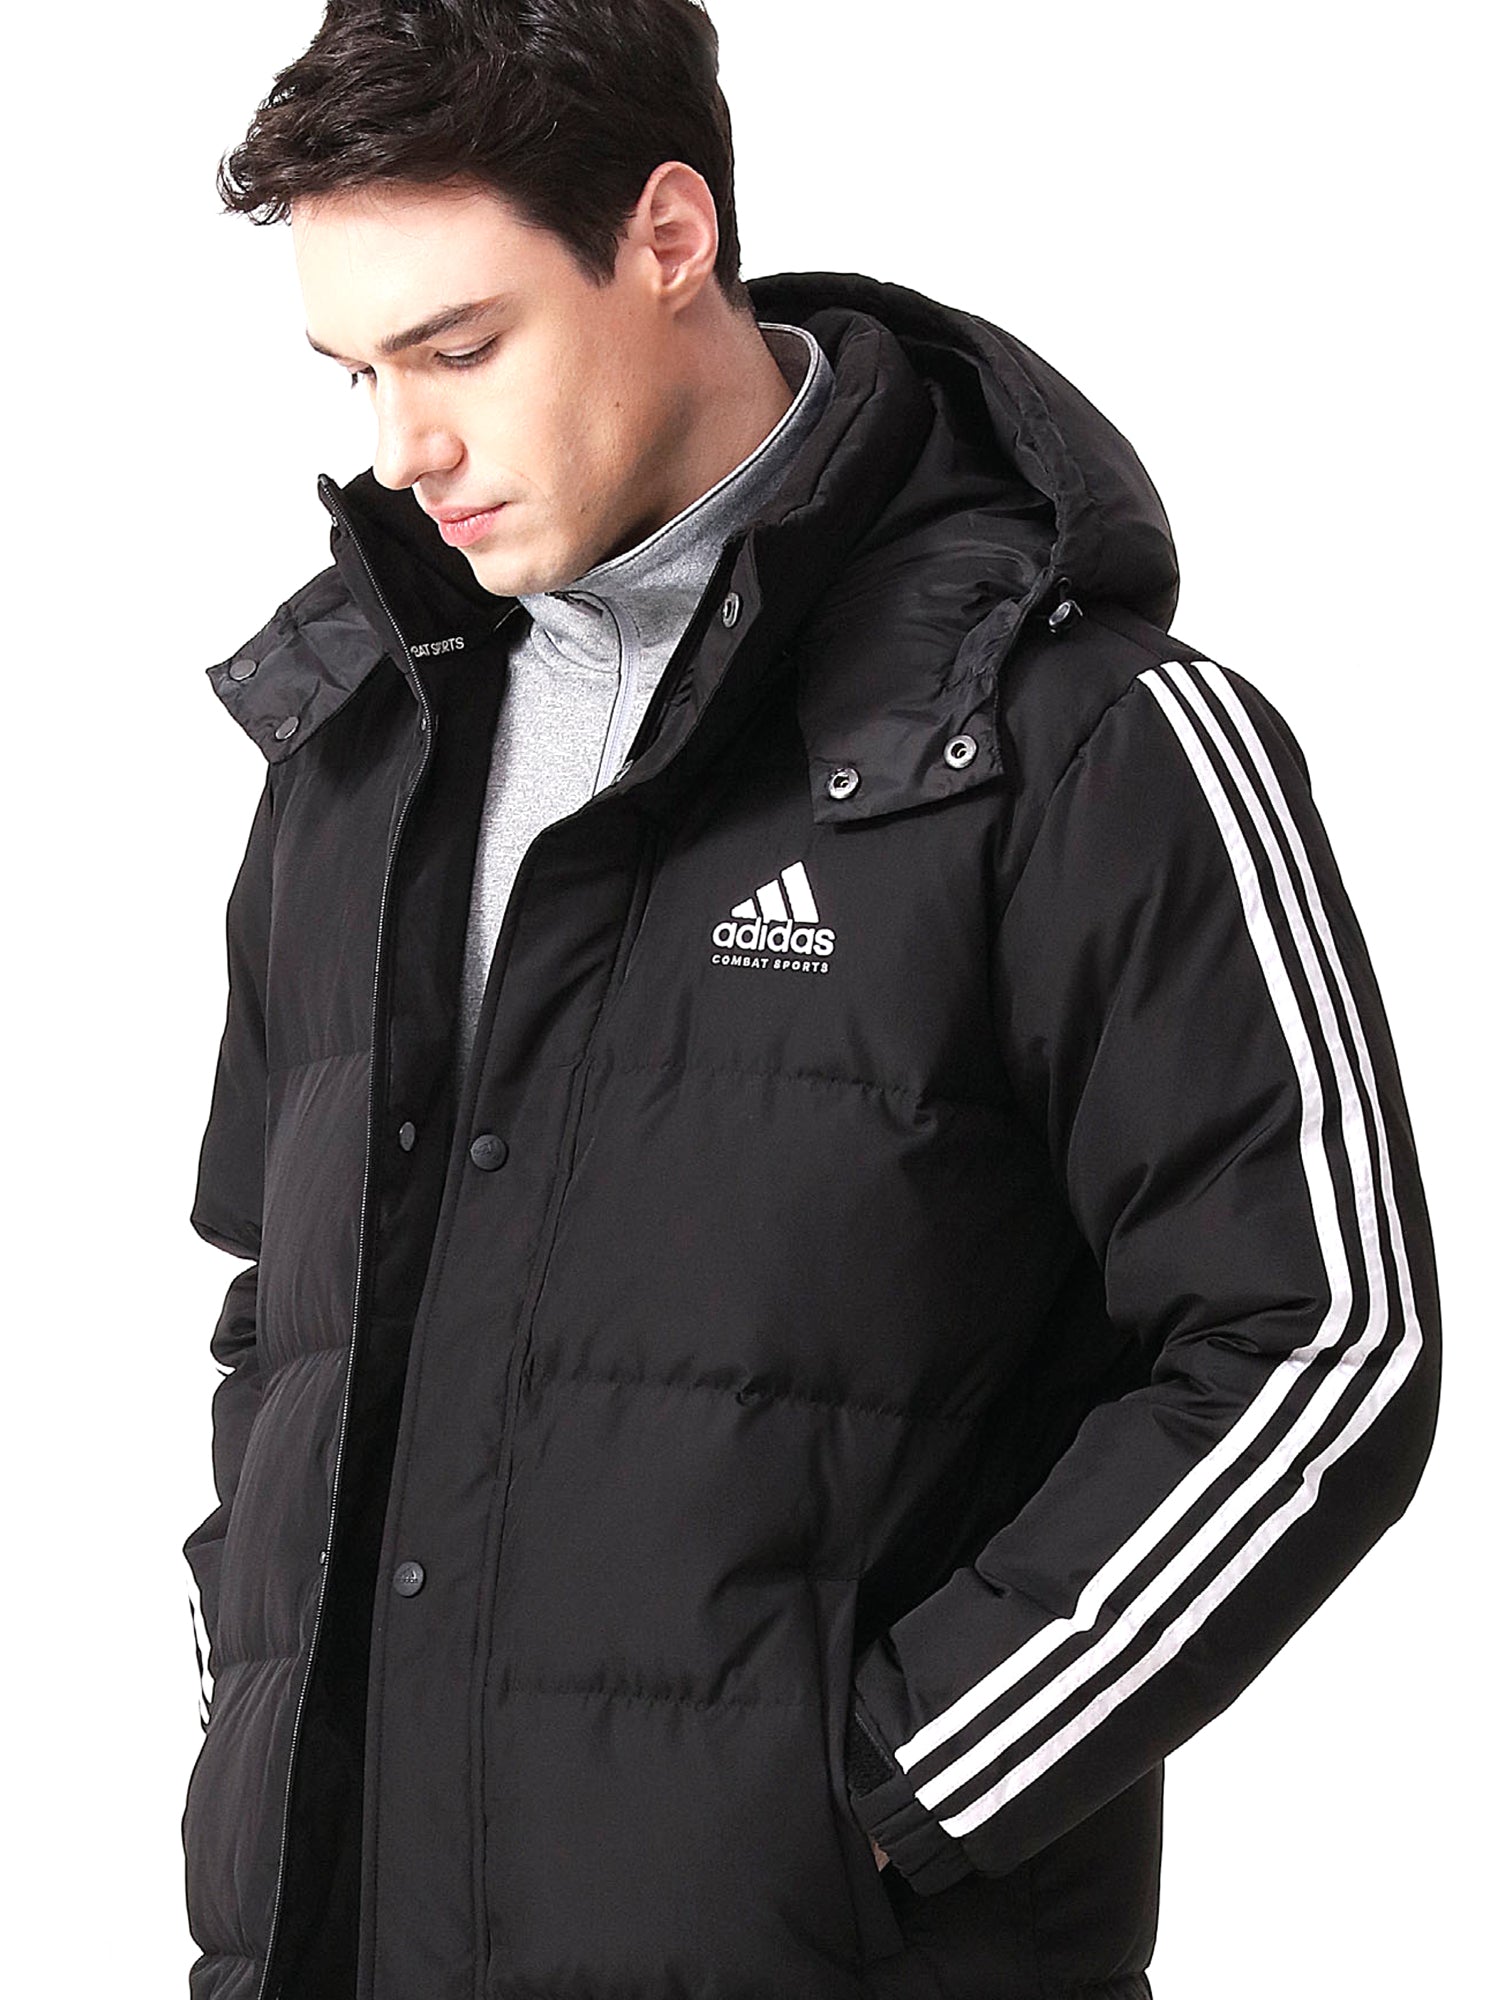 AAU Embroidered adidas Combat Sports Winter Long Padded Parka Jacket – All American Martial